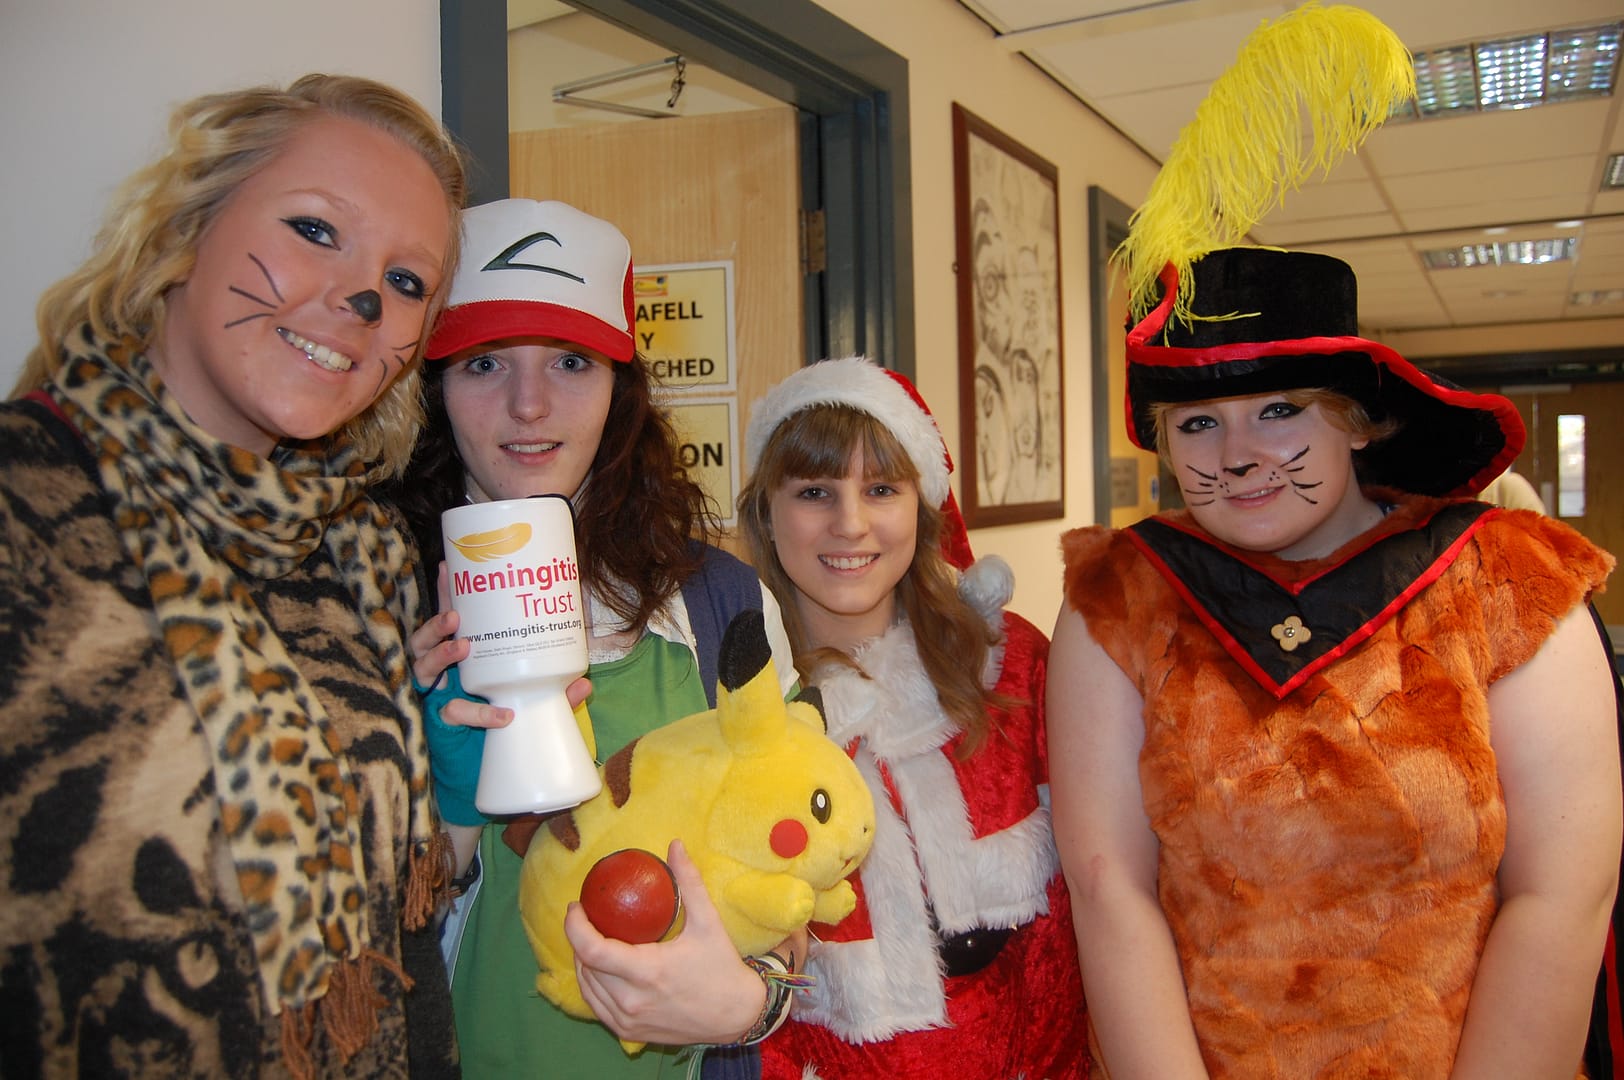 Four sixth form students in colourful costumes posing for Children in Need fundraising.